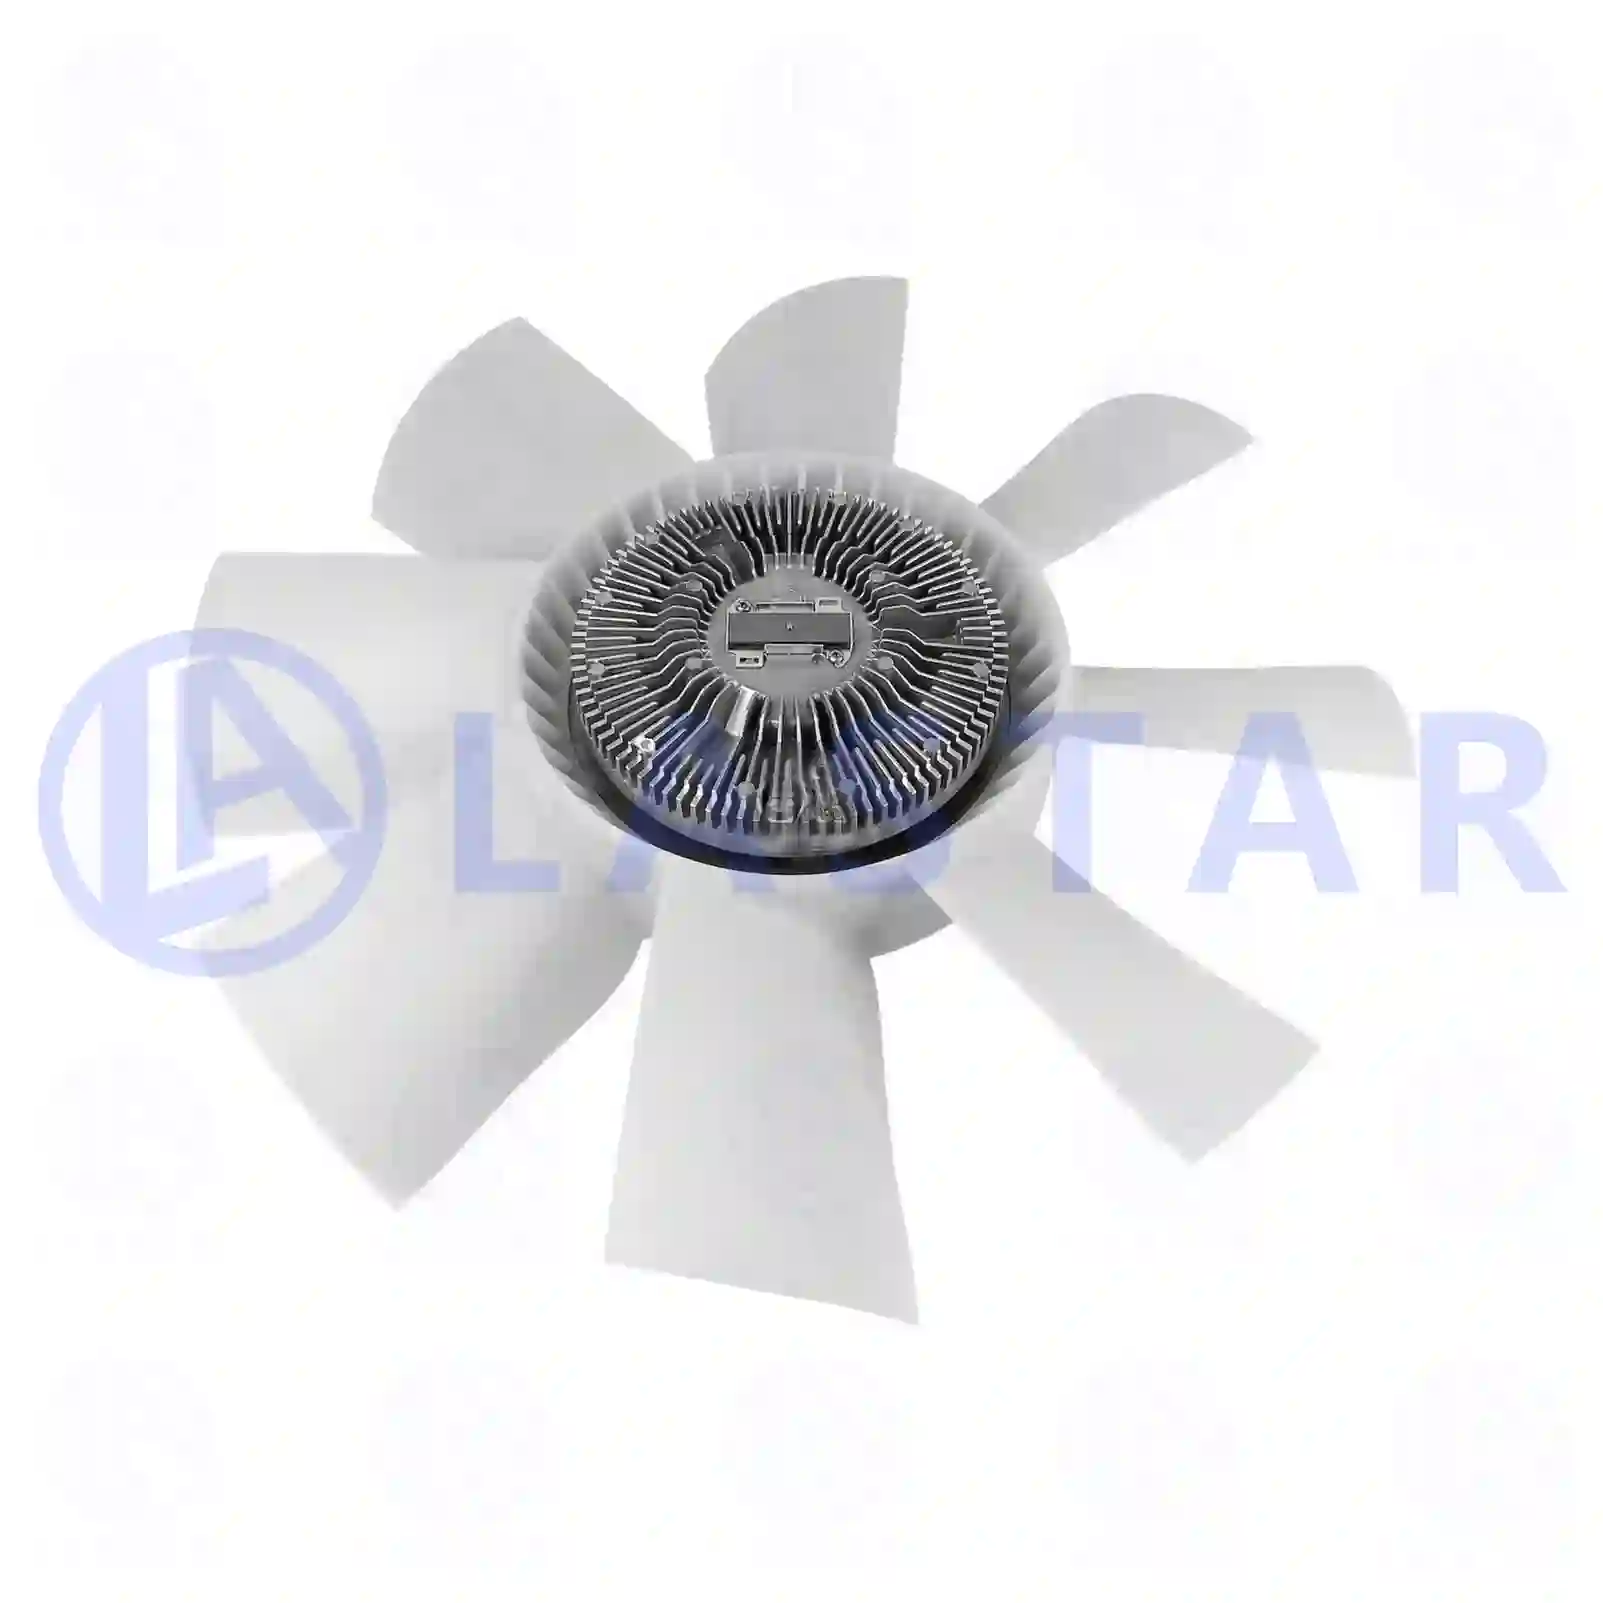 Fan with clutch, 77709381, 1675910, 20364981, 8112737, 8113632, 8118737, 8119632, 8149397 ||  77709381 Lastar Spare Part | Truck Spare Parts, Auotomotive Spare Parts Fan with clutch, 77709381, 1675910, 20364981, 8112737, 8113632, 8118737, 8119632, 8149397 ||  77709381 Lastar Spare Part | Truck Spare Parts, Auotomotive Spare Parts